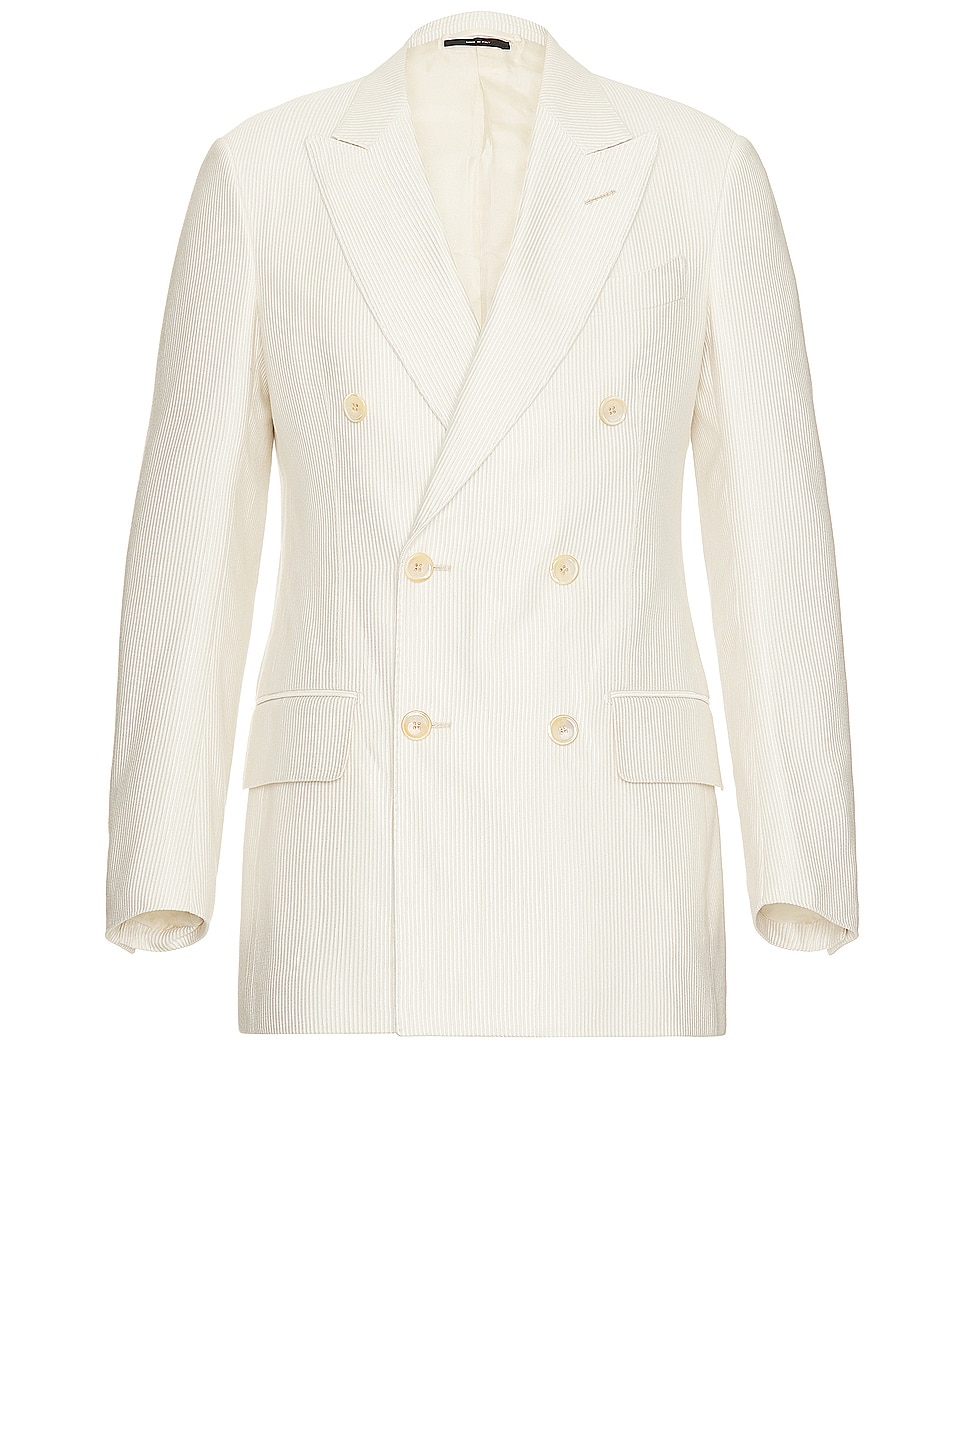 Image 1 of TOM FORD Silk Cotton Cannete Atticus Double Breasted Jacket in Ivory